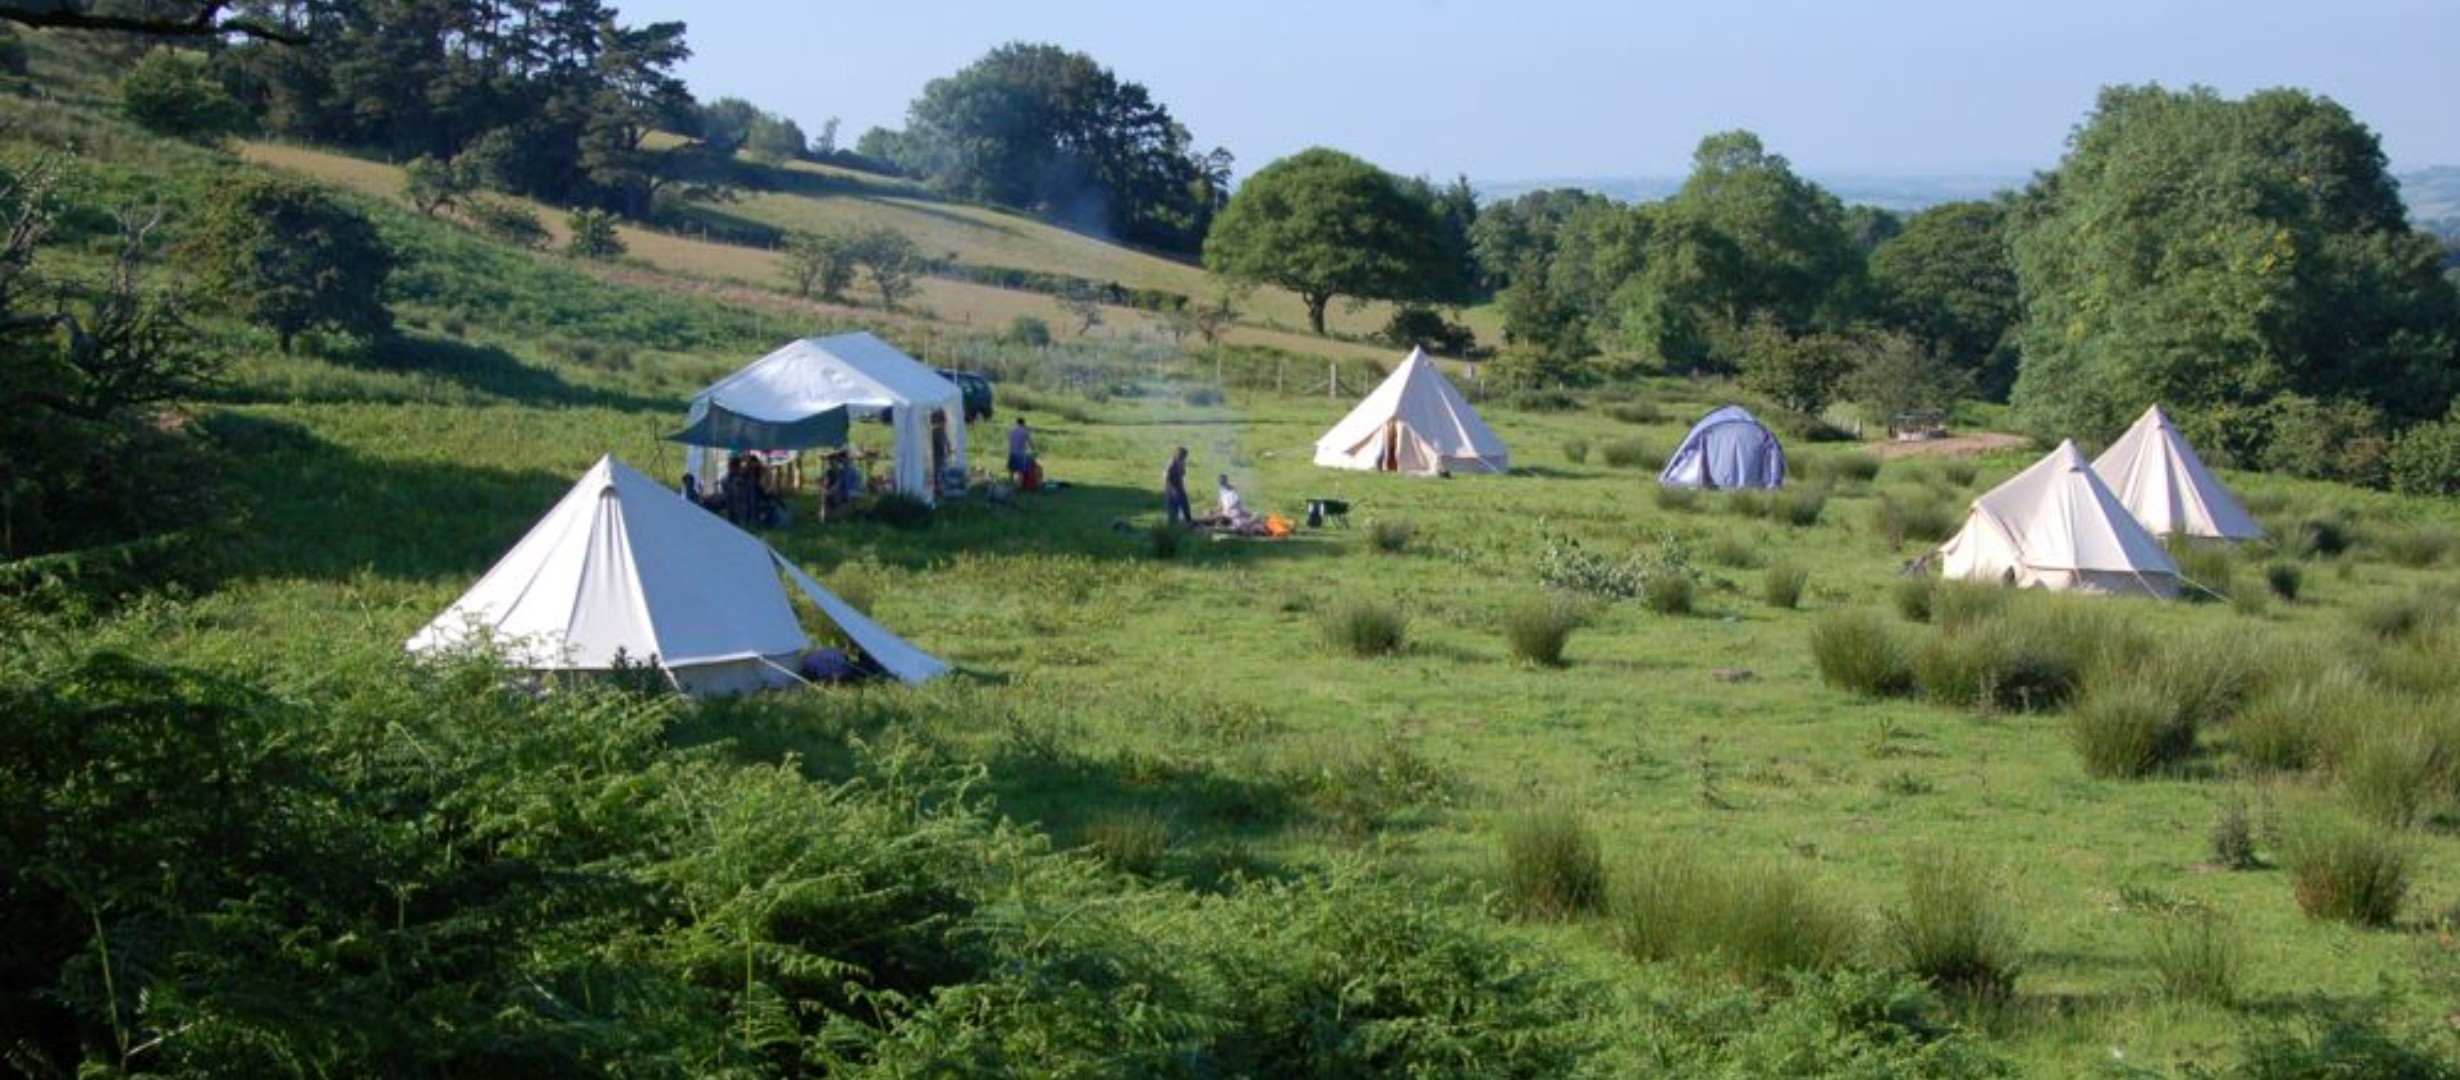 Green field with 6 tents pitched in a circle and a fire in the middle